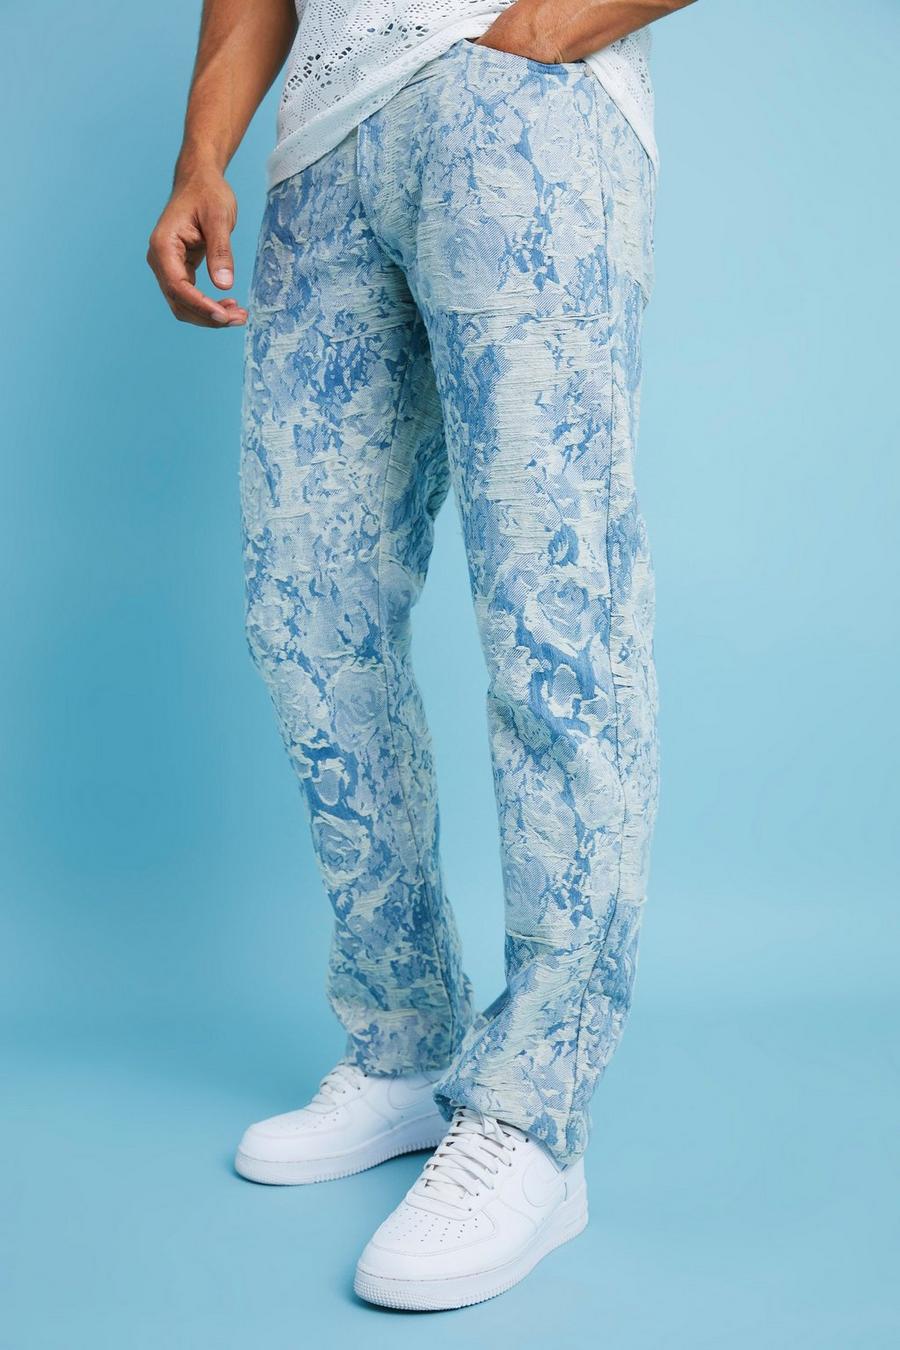 Flower Jeans Womens, Straight Jeans Mens